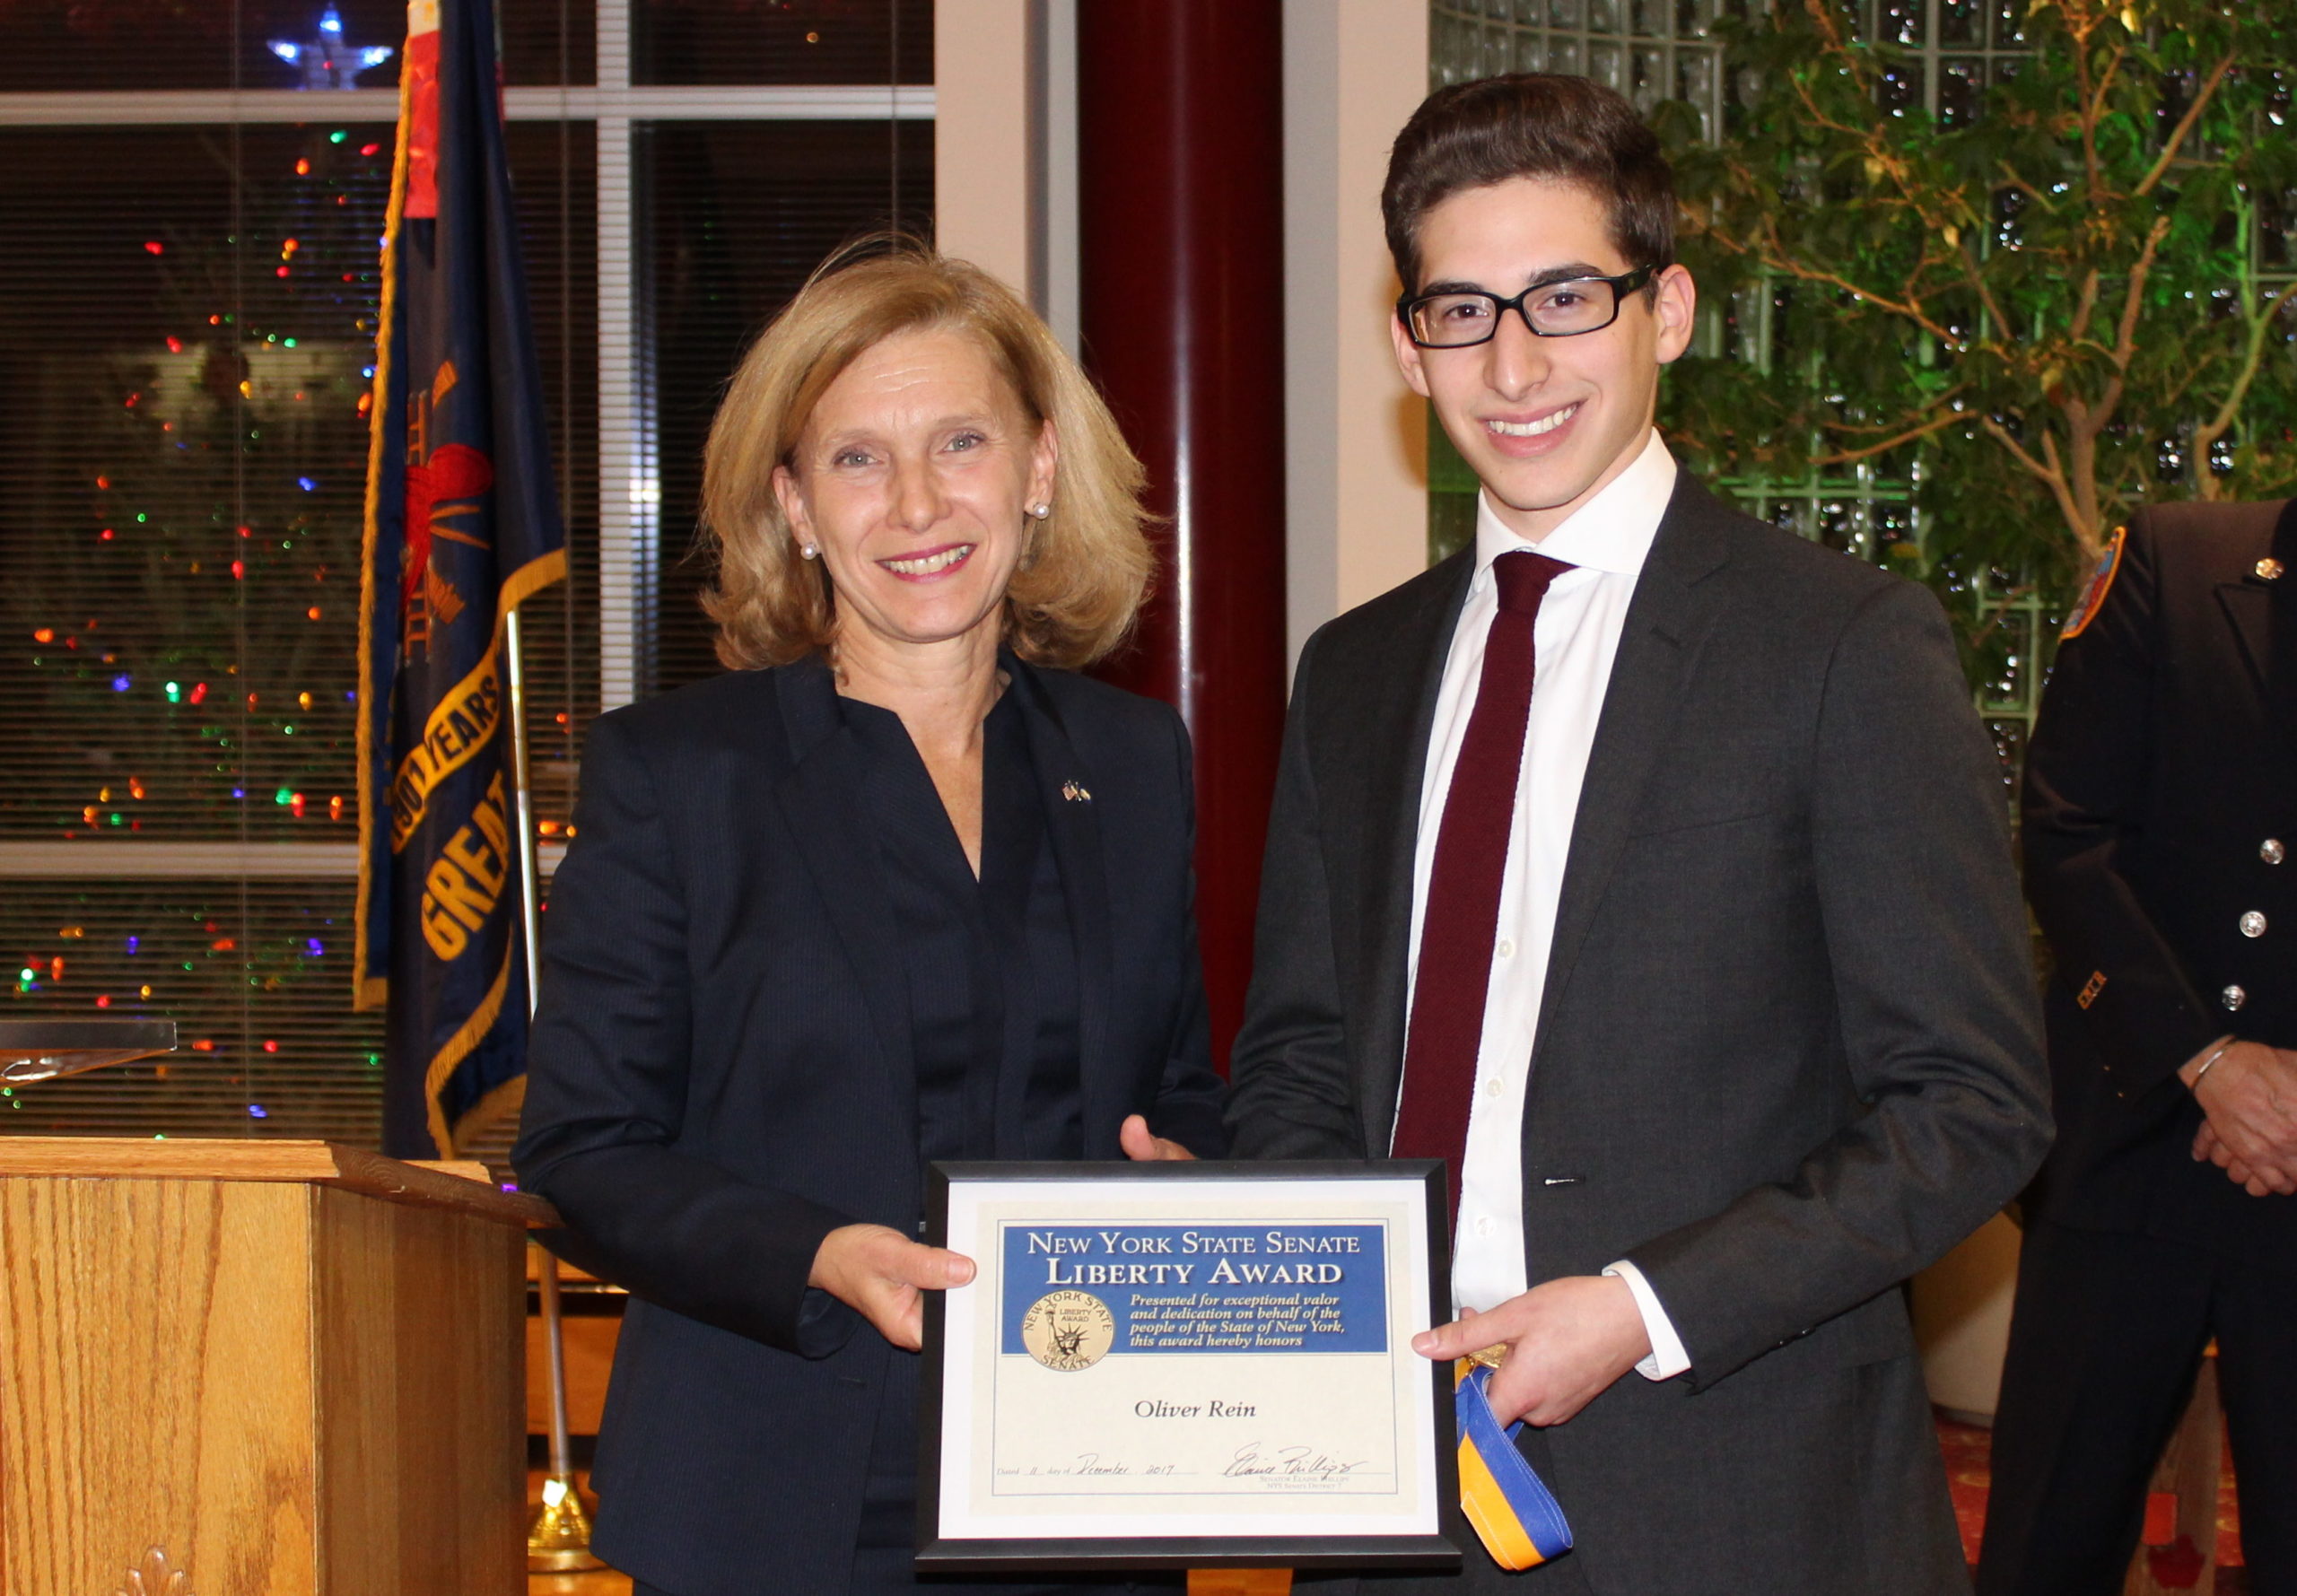 Senator Elaine Phillips presented the New York State Senate’s Liberty Medal to Oliver Rein, a 16-year-old Great Neck junior firefighter who extricated two people from a vehicle after the car crashed into a tree in August. (Photo courtesy of state Sen. Elaine Phillips' office)